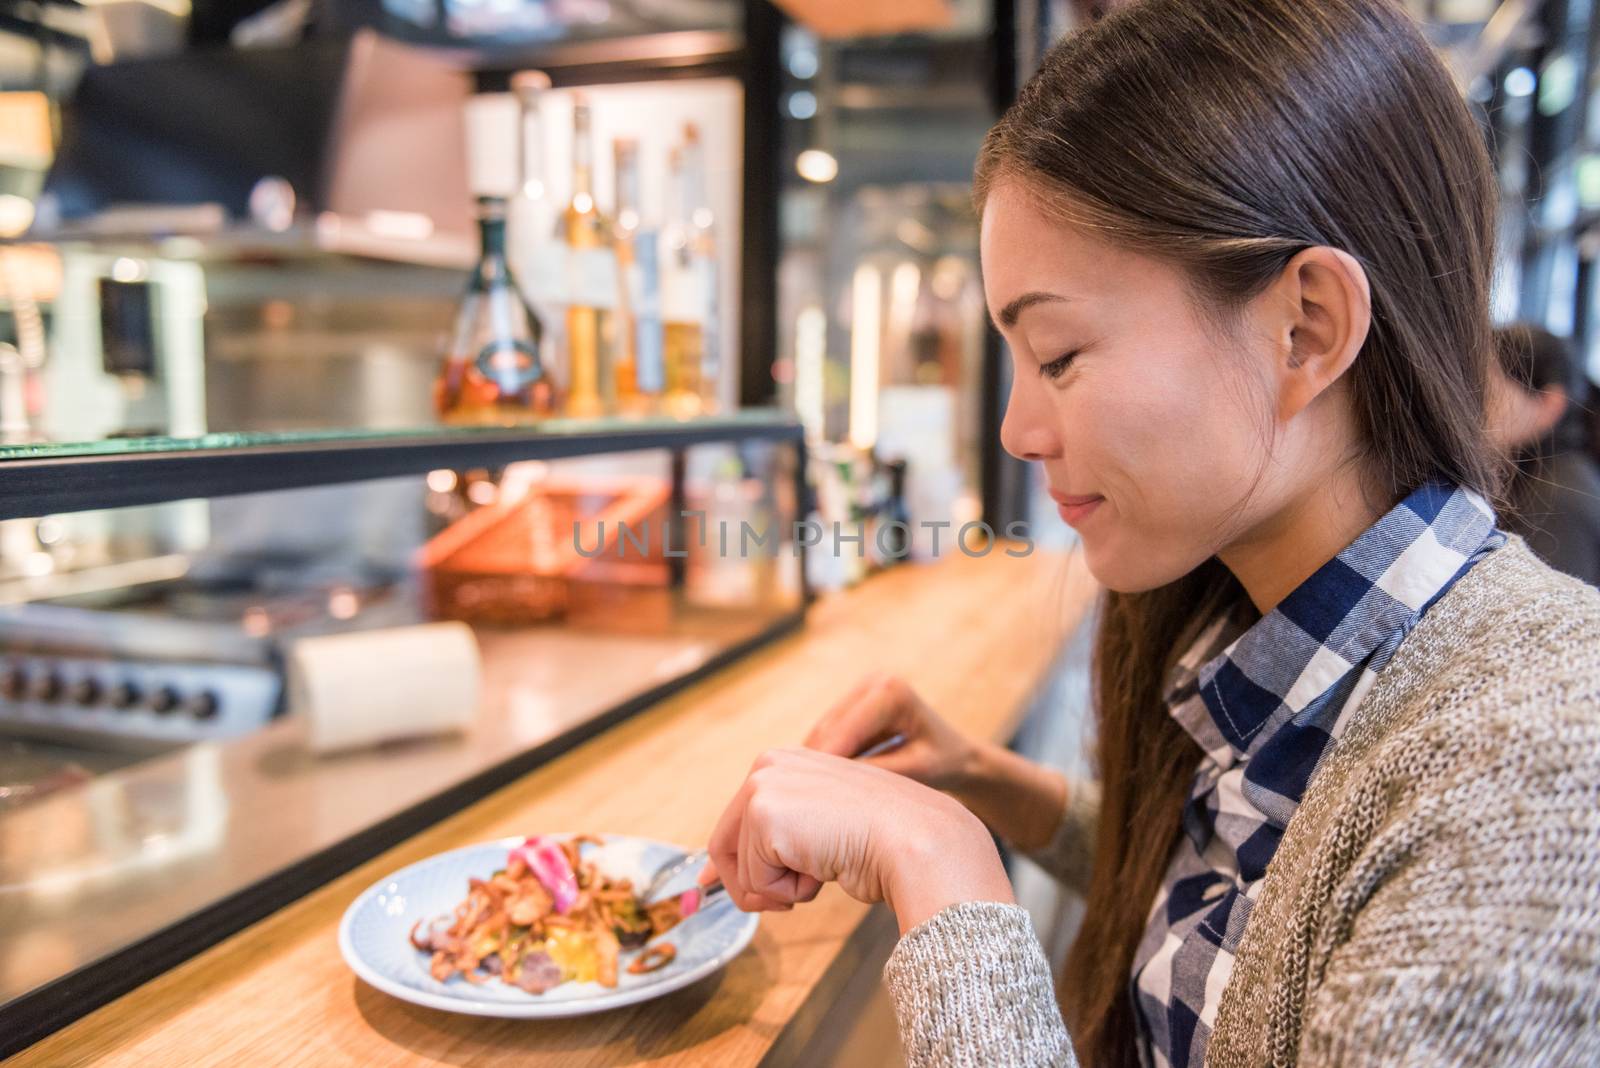 Woman eating at danish restaurant the traditional smorrebrod open sandwich at market stall counter. Happy Asian tourist trying typical meal from Denmark. Copenhagen city travel lifestyle. by Maridav